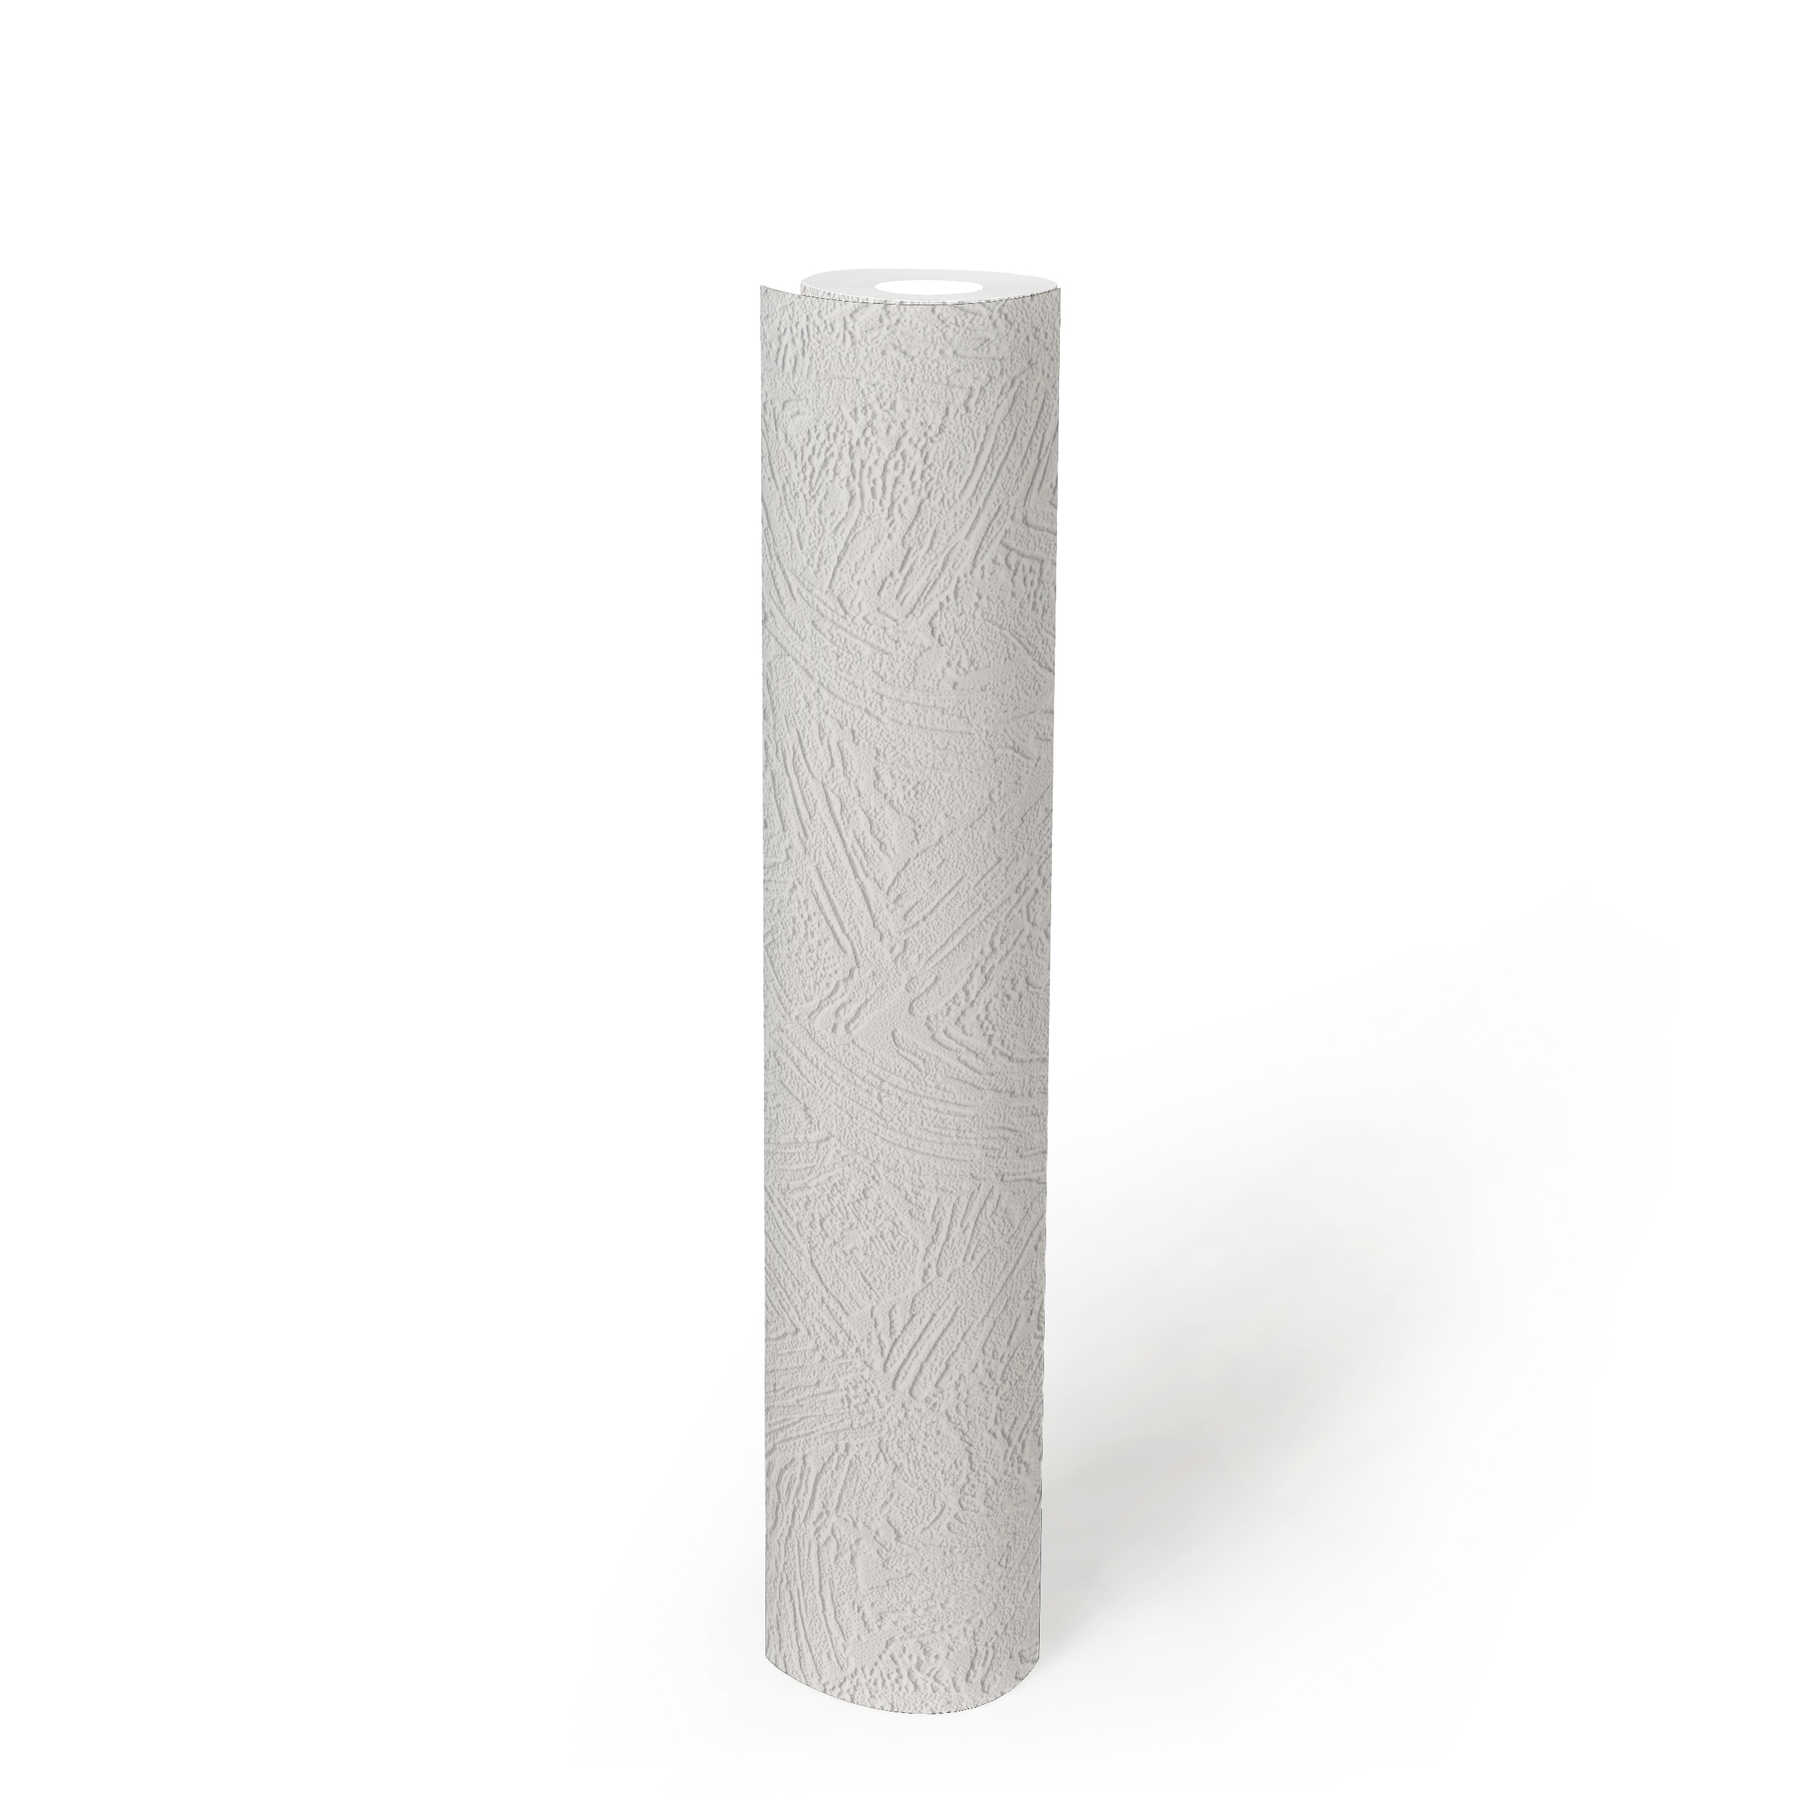             Wallpaper decor plaster with textured pattern - white
        